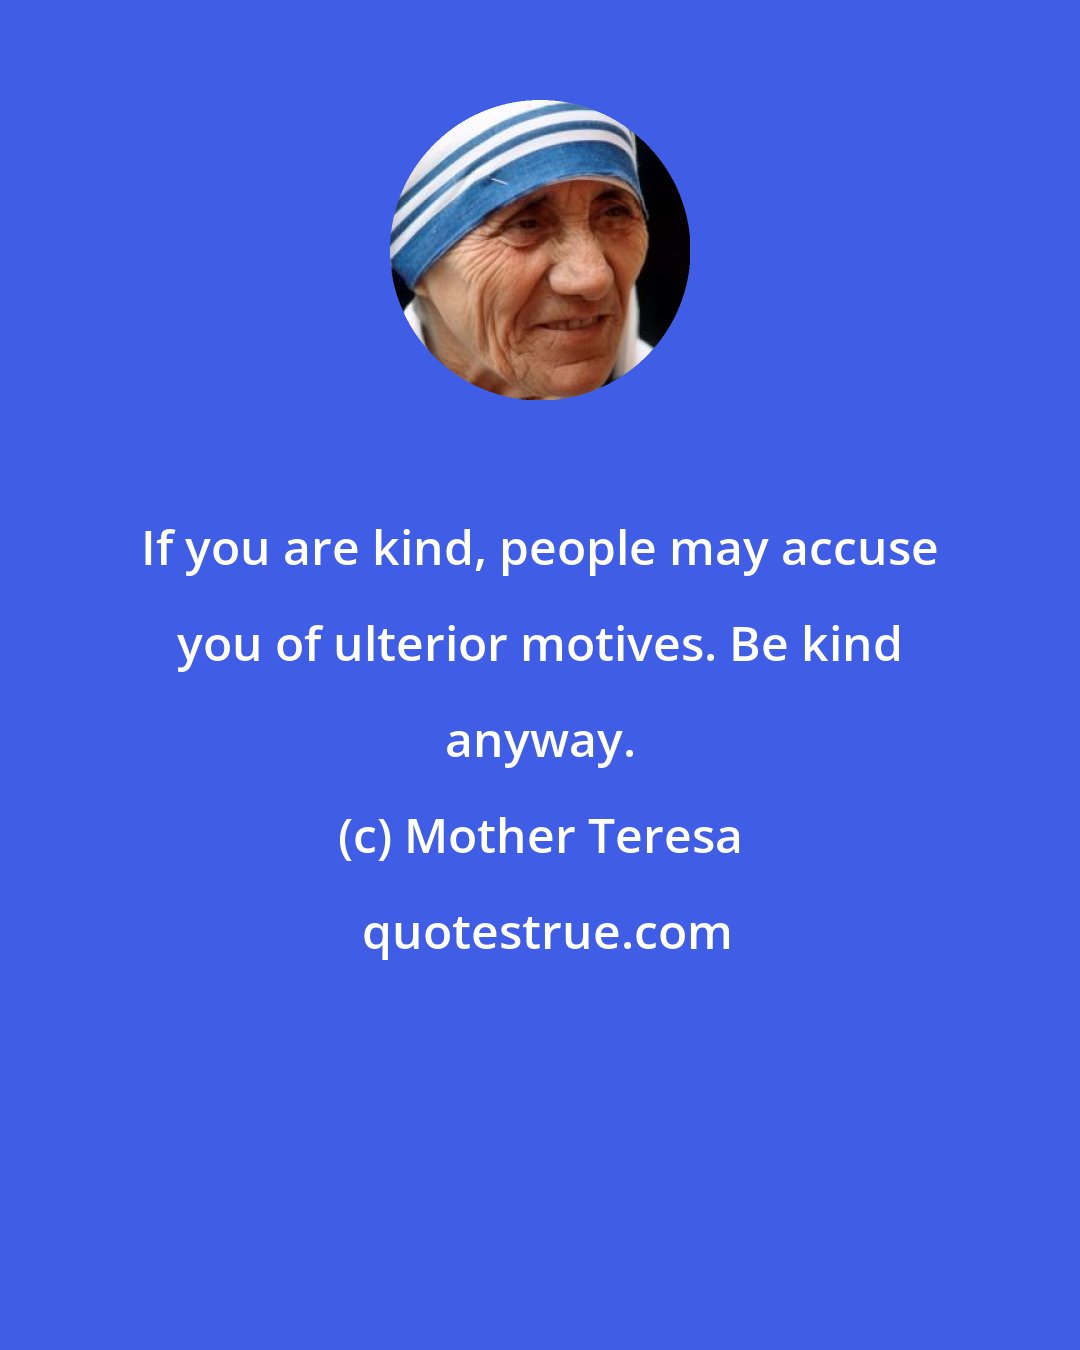 Mother Teresa: If you are kind, people may accuse you of ulterior motives. Be kind anyway.